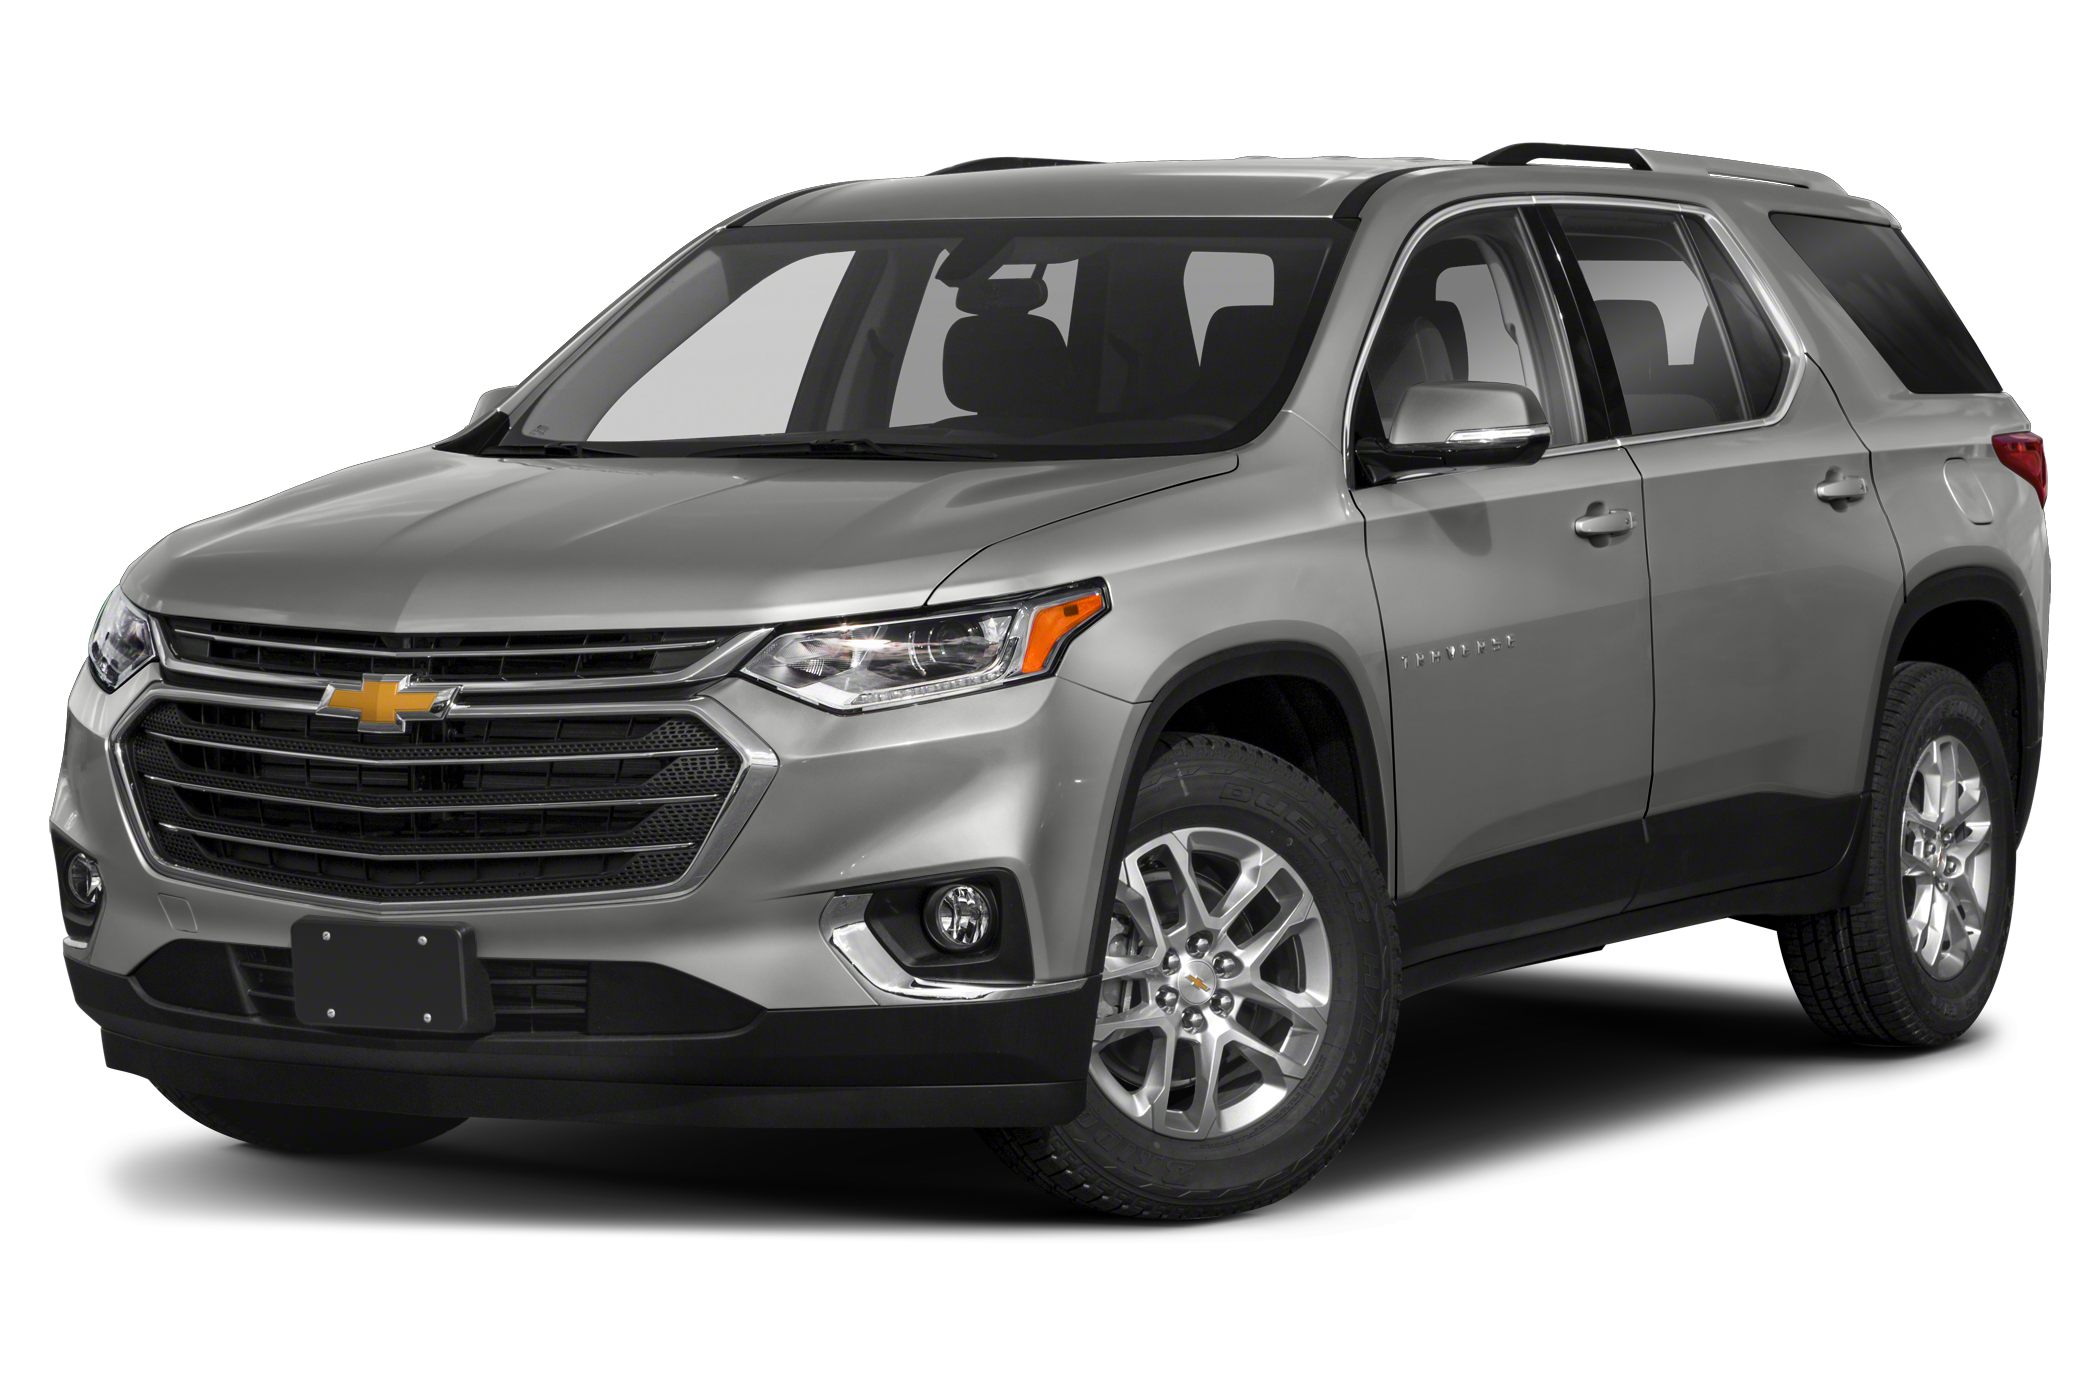 Great Deals on a new 2020 Chevrolet Traverse LT Leather Frontwheel